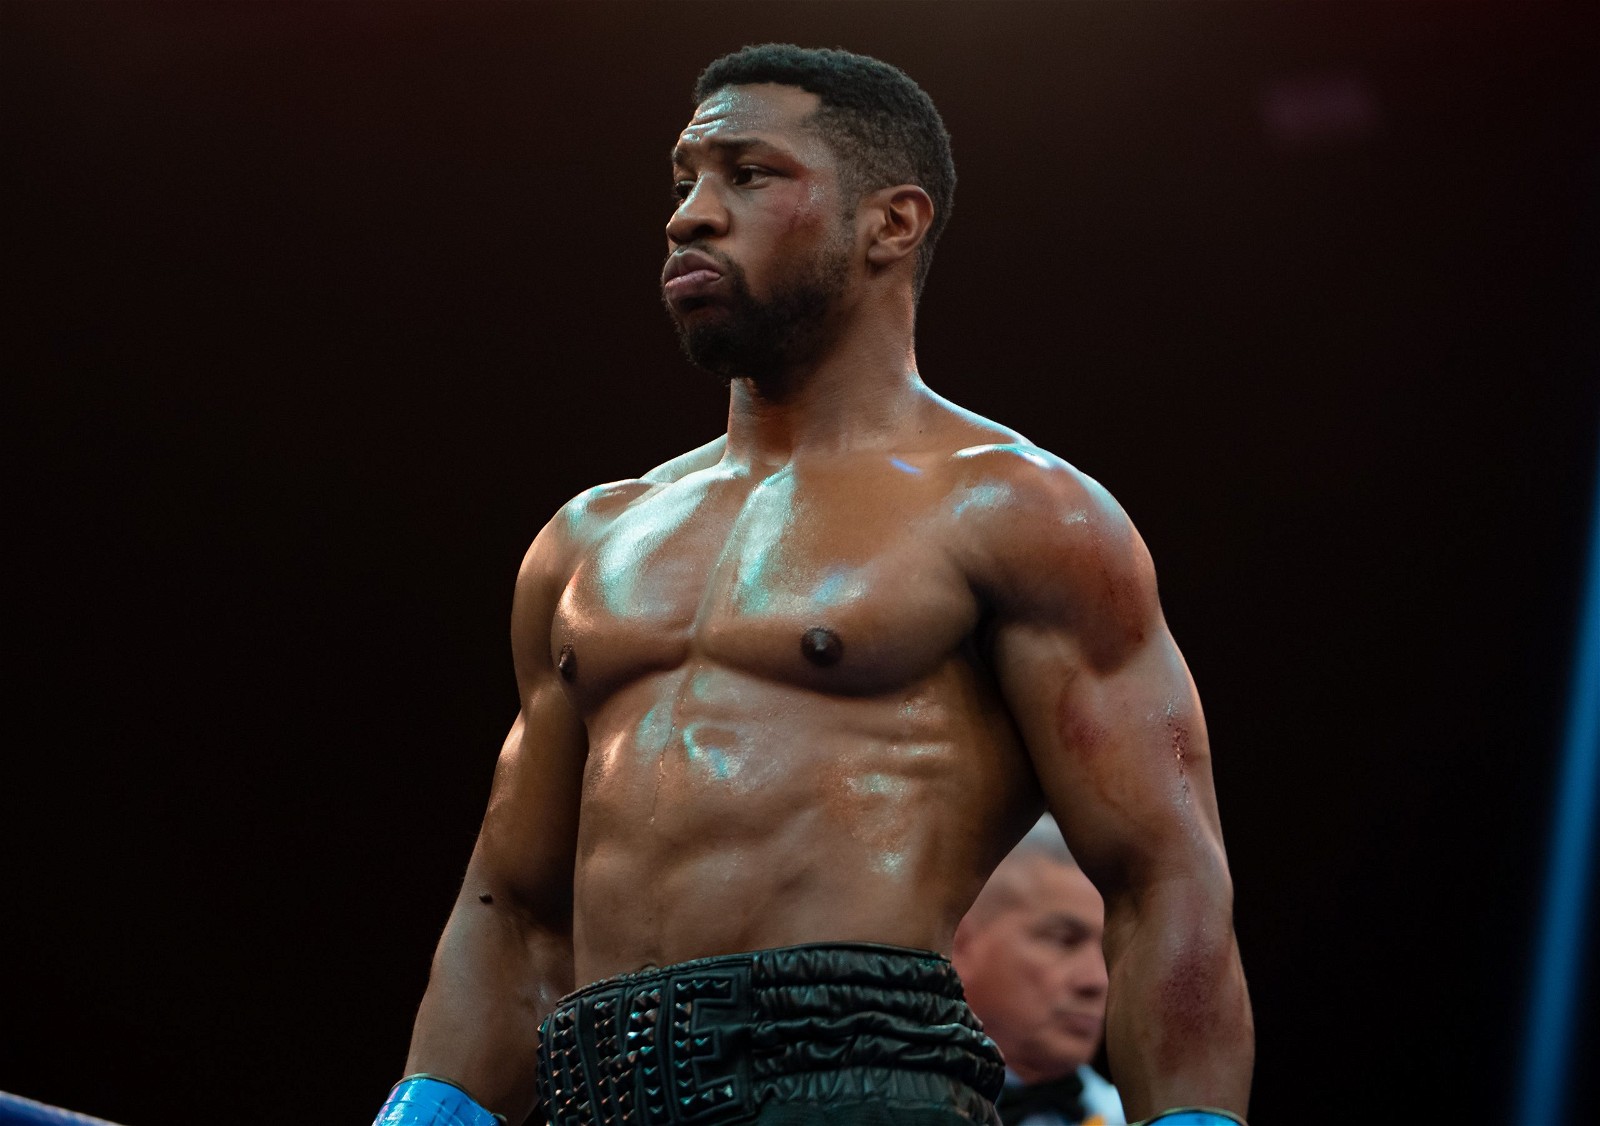 Jonathan Majors as the antagonist in Creed III